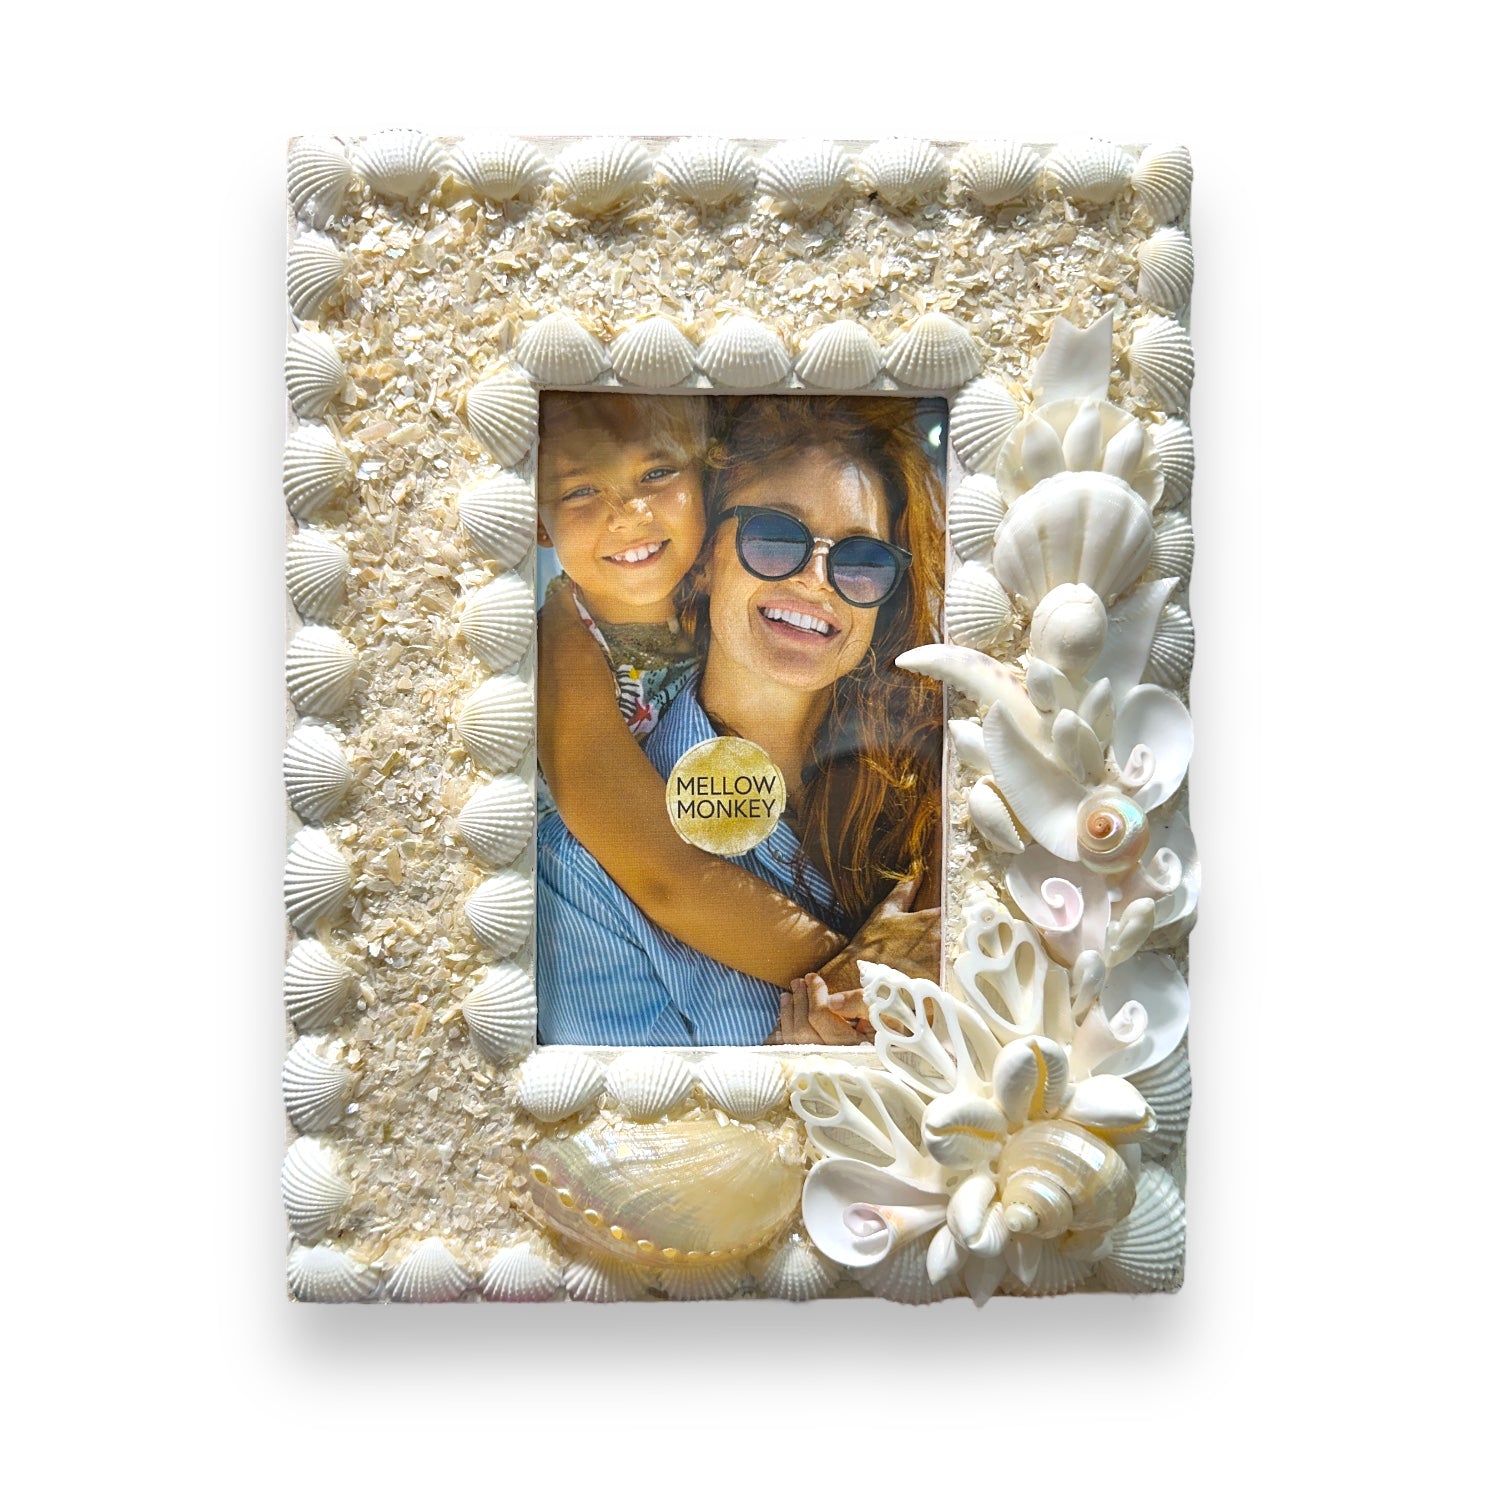 Genuine Seashell Cluster Photo Picture Frame for 4x6 Photo - Mellow Monkey